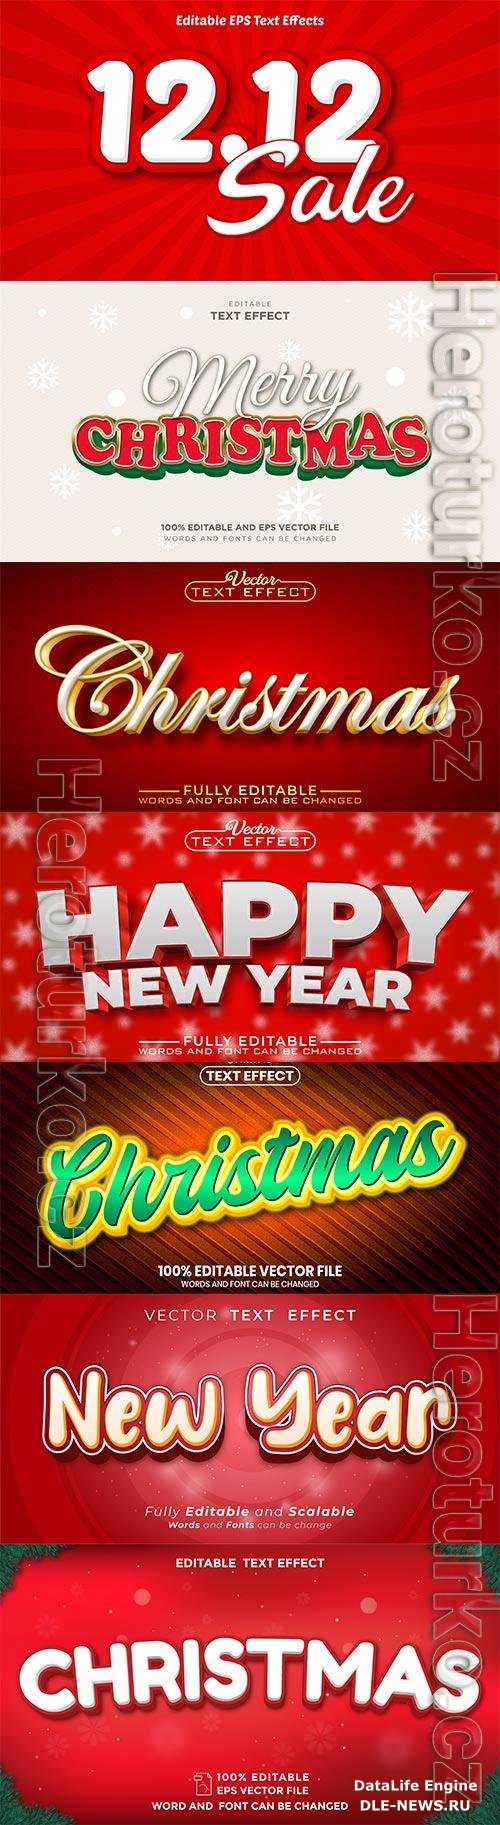 Christmas text font style editable, New year text vector effect